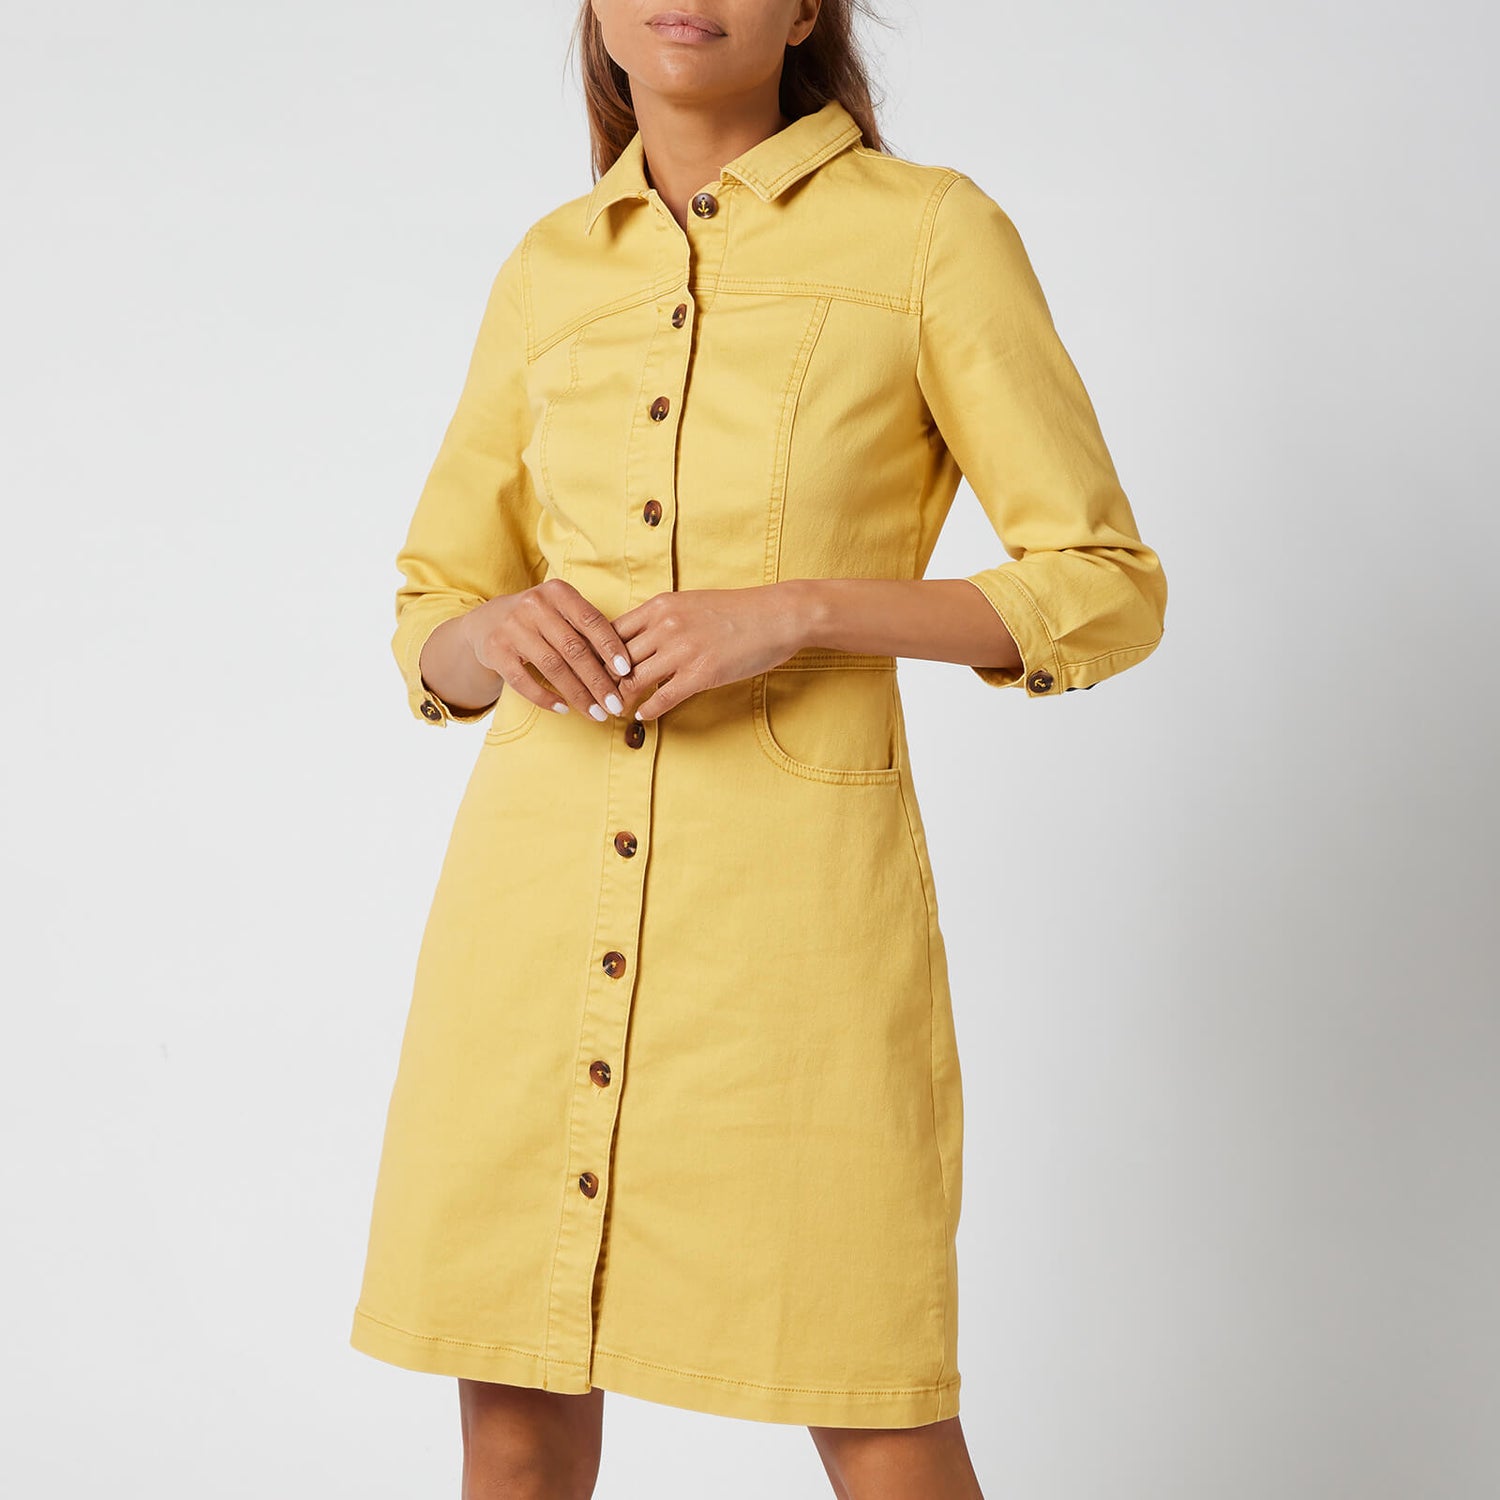 Joules Women's Wilmer Dress - Misted Yellow